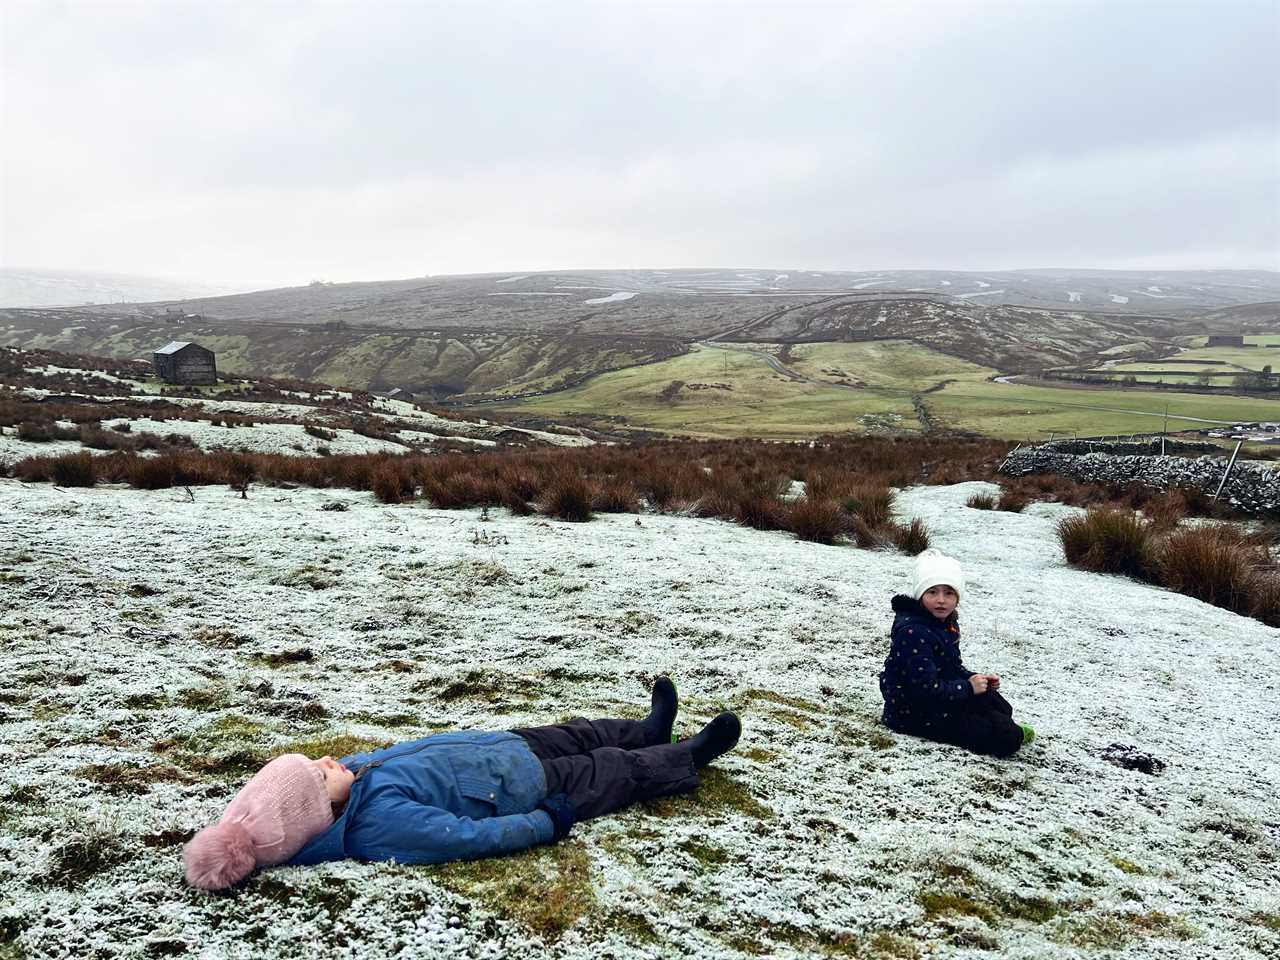 The family live in the rugged landscapes of North Yorkshire